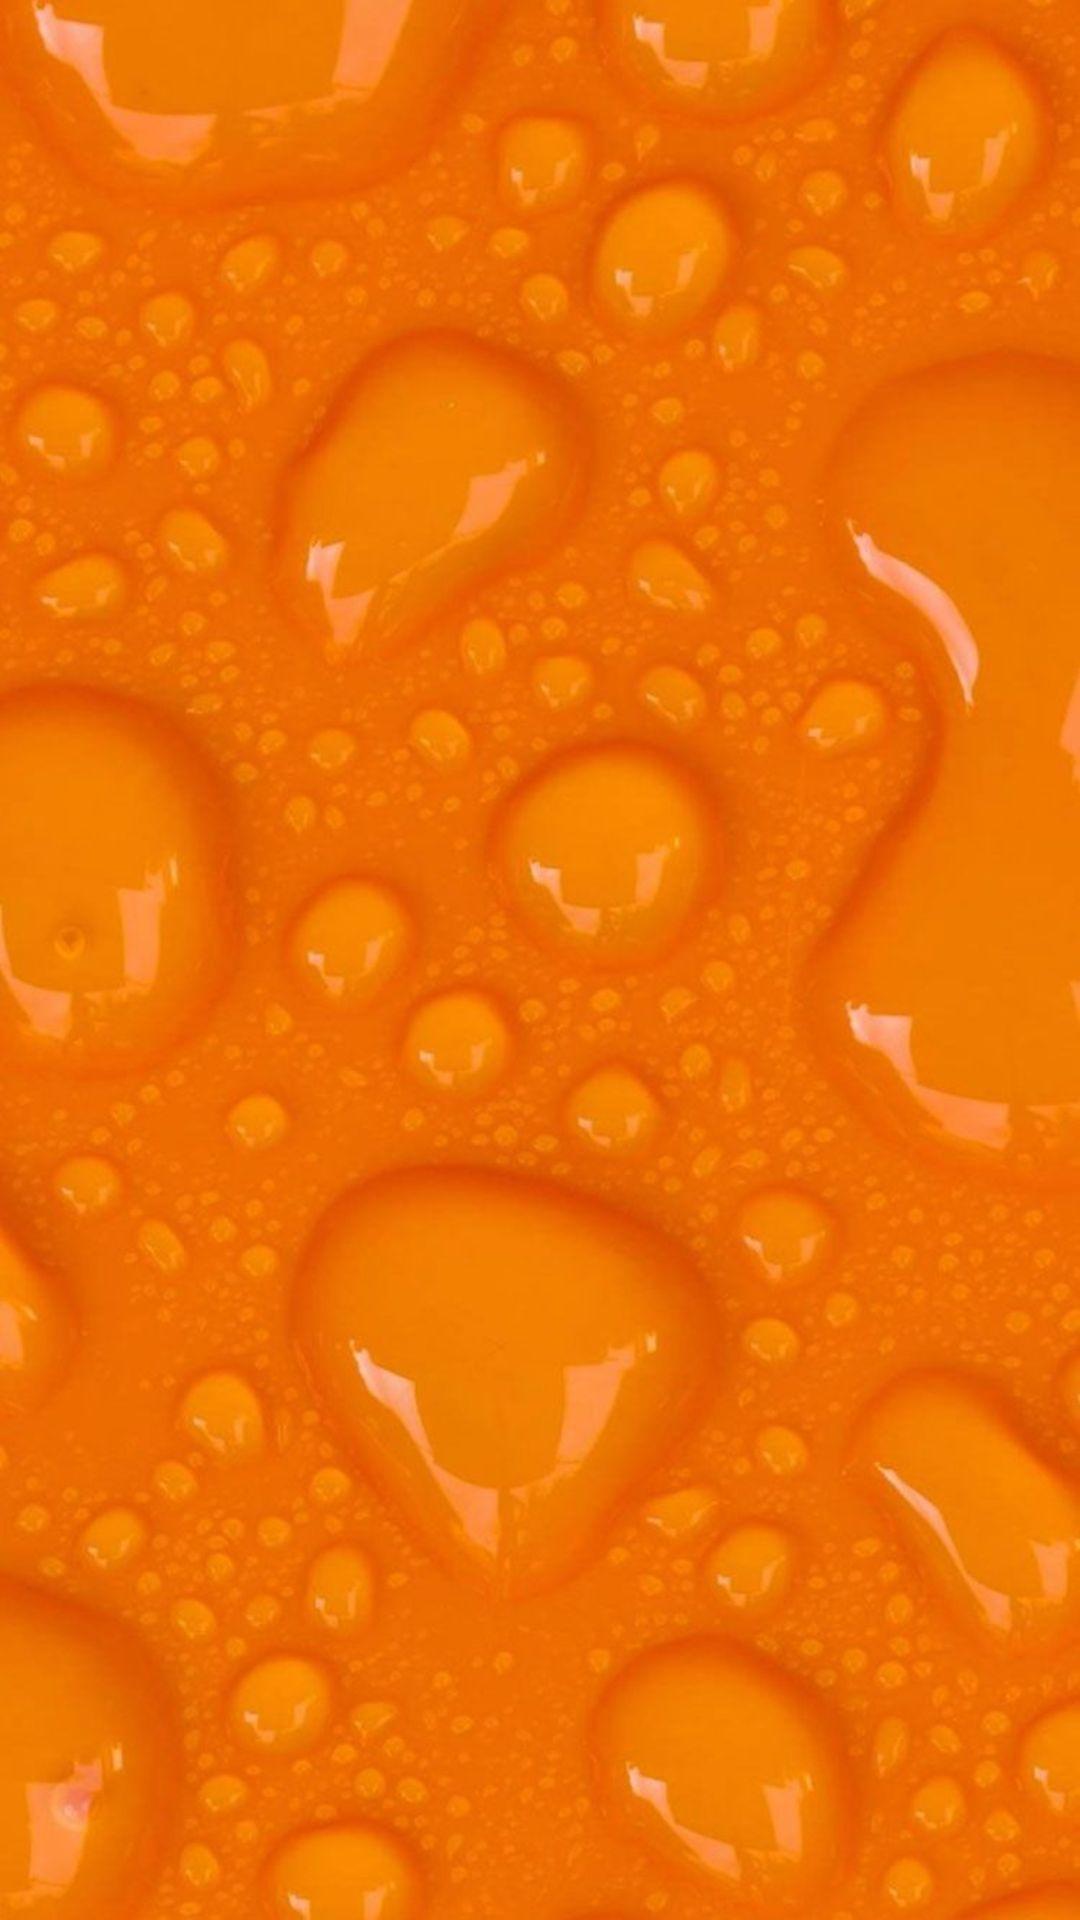 Orange Wallpaper HD For Android Apk